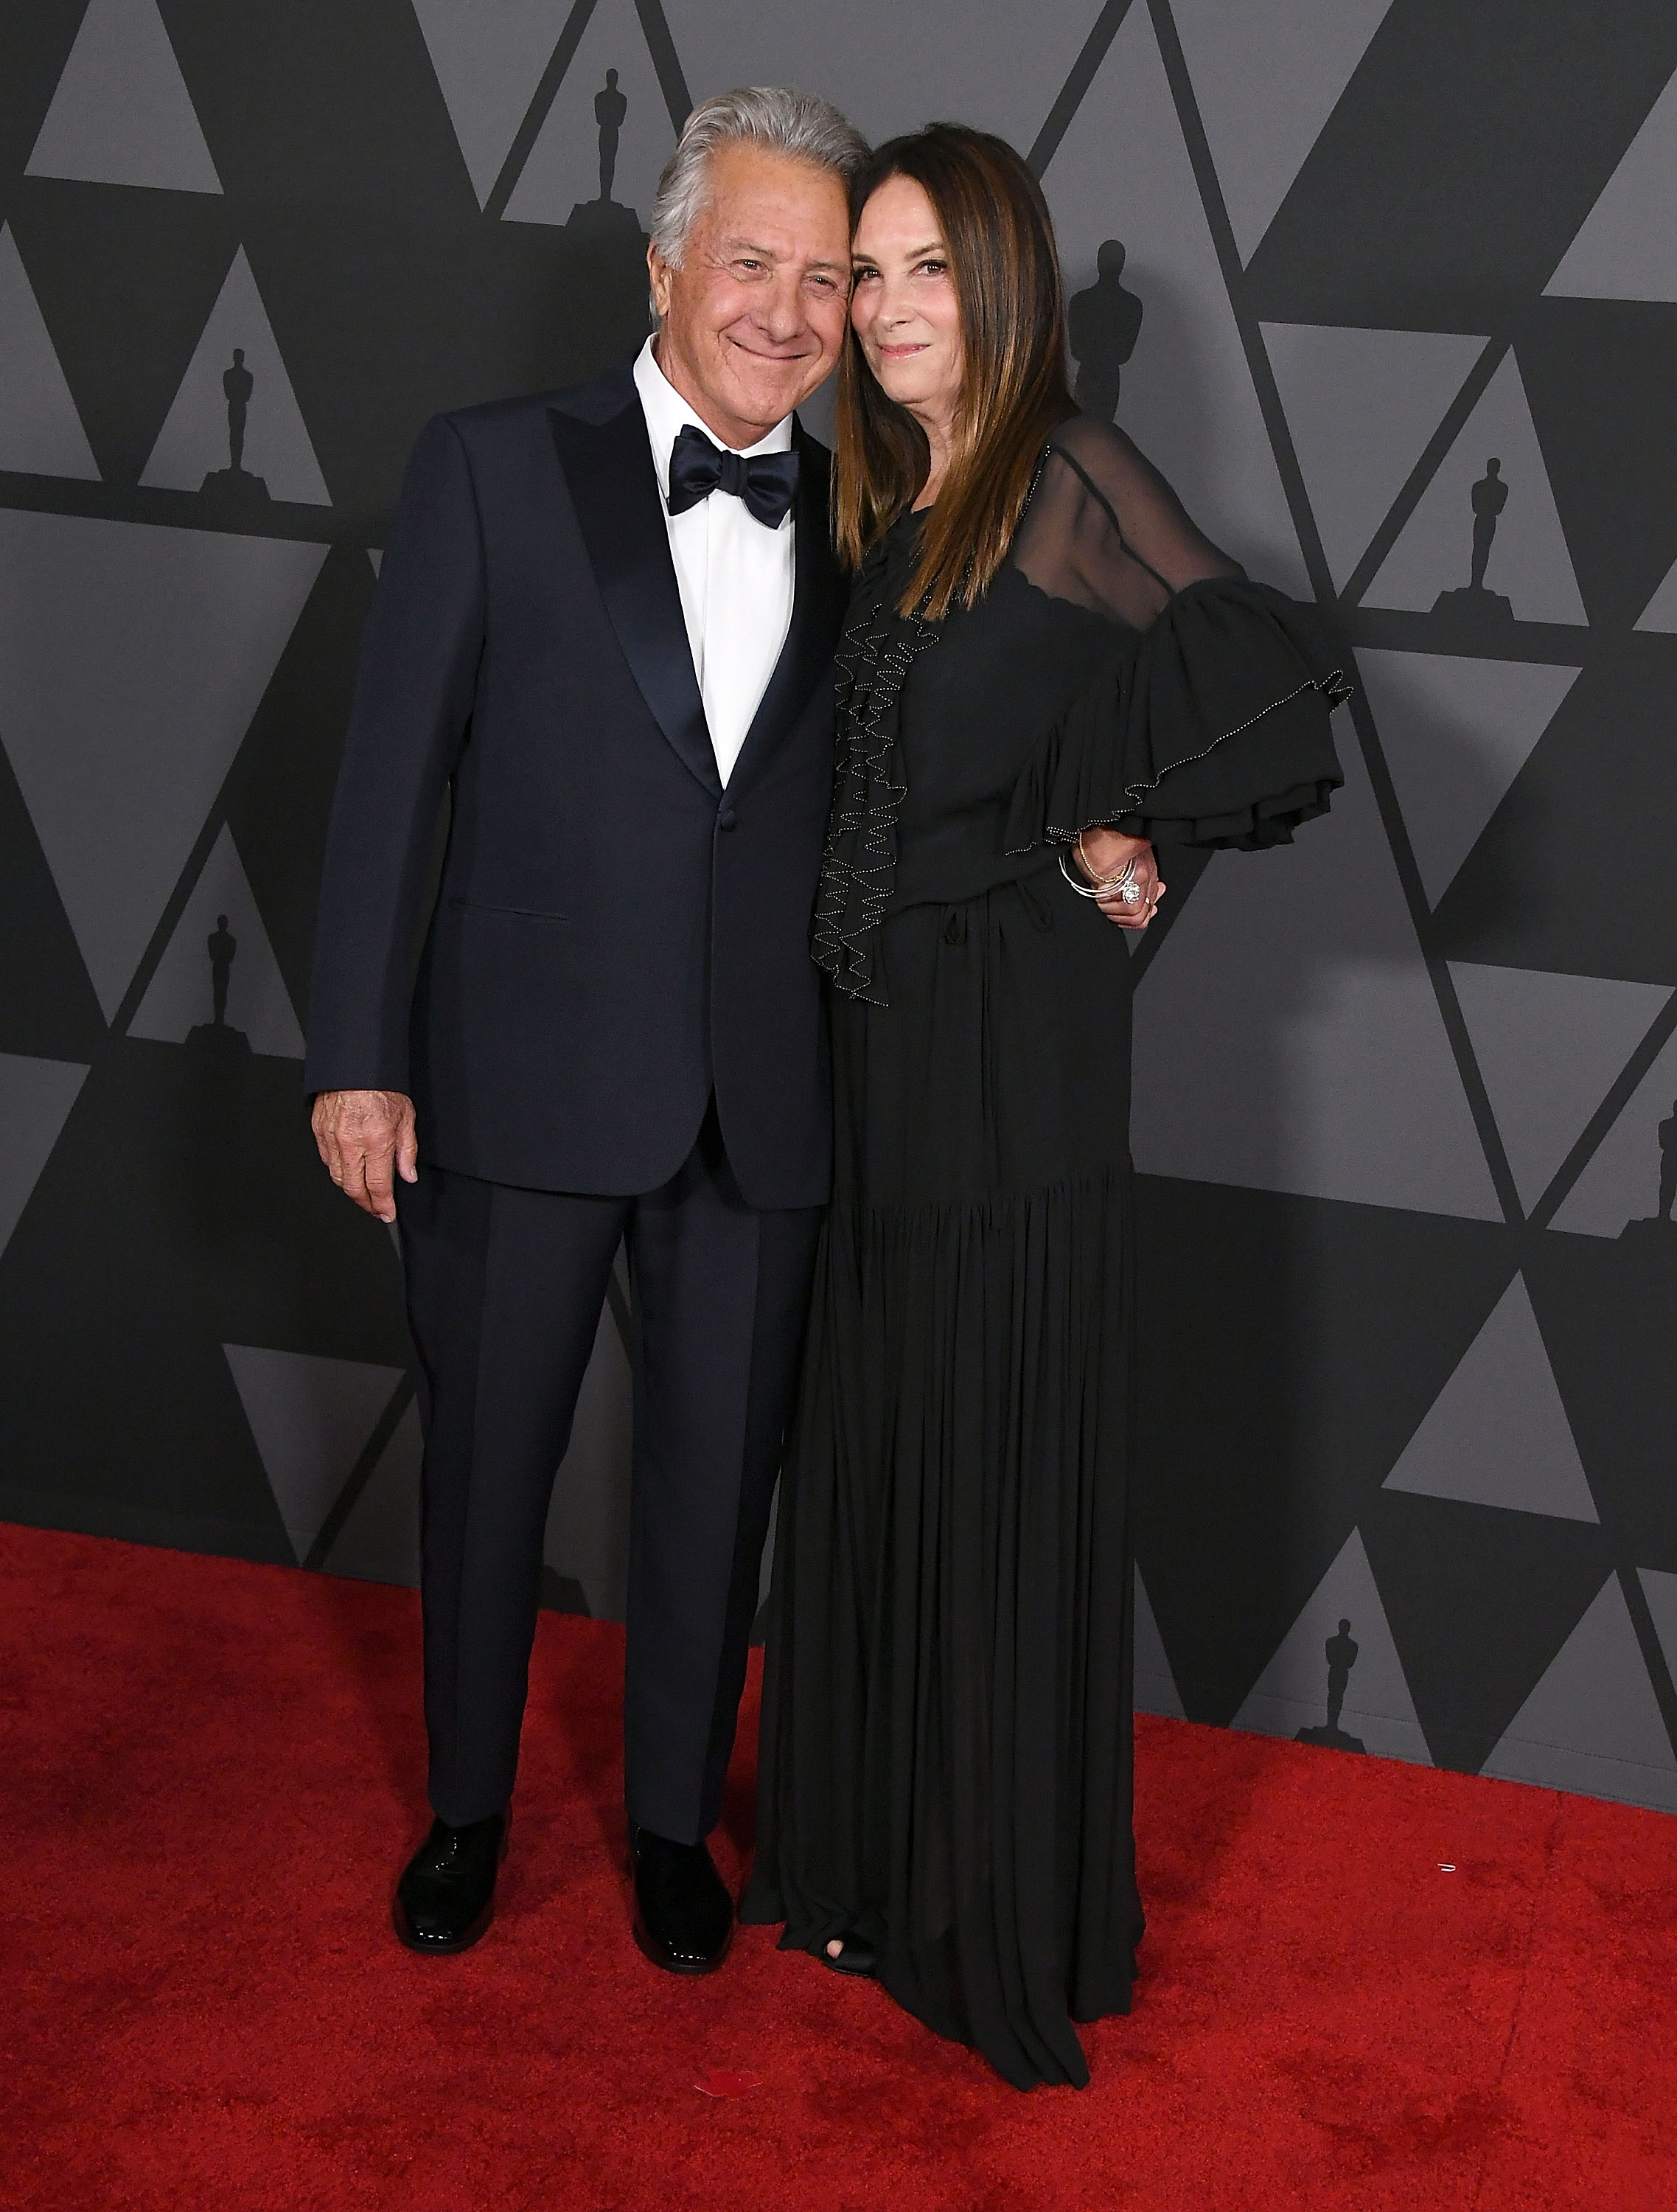  Dustin Hoffman and Lisa Hoffman on November 11, 2017 in Hollywood, California | Source: Getty Images 